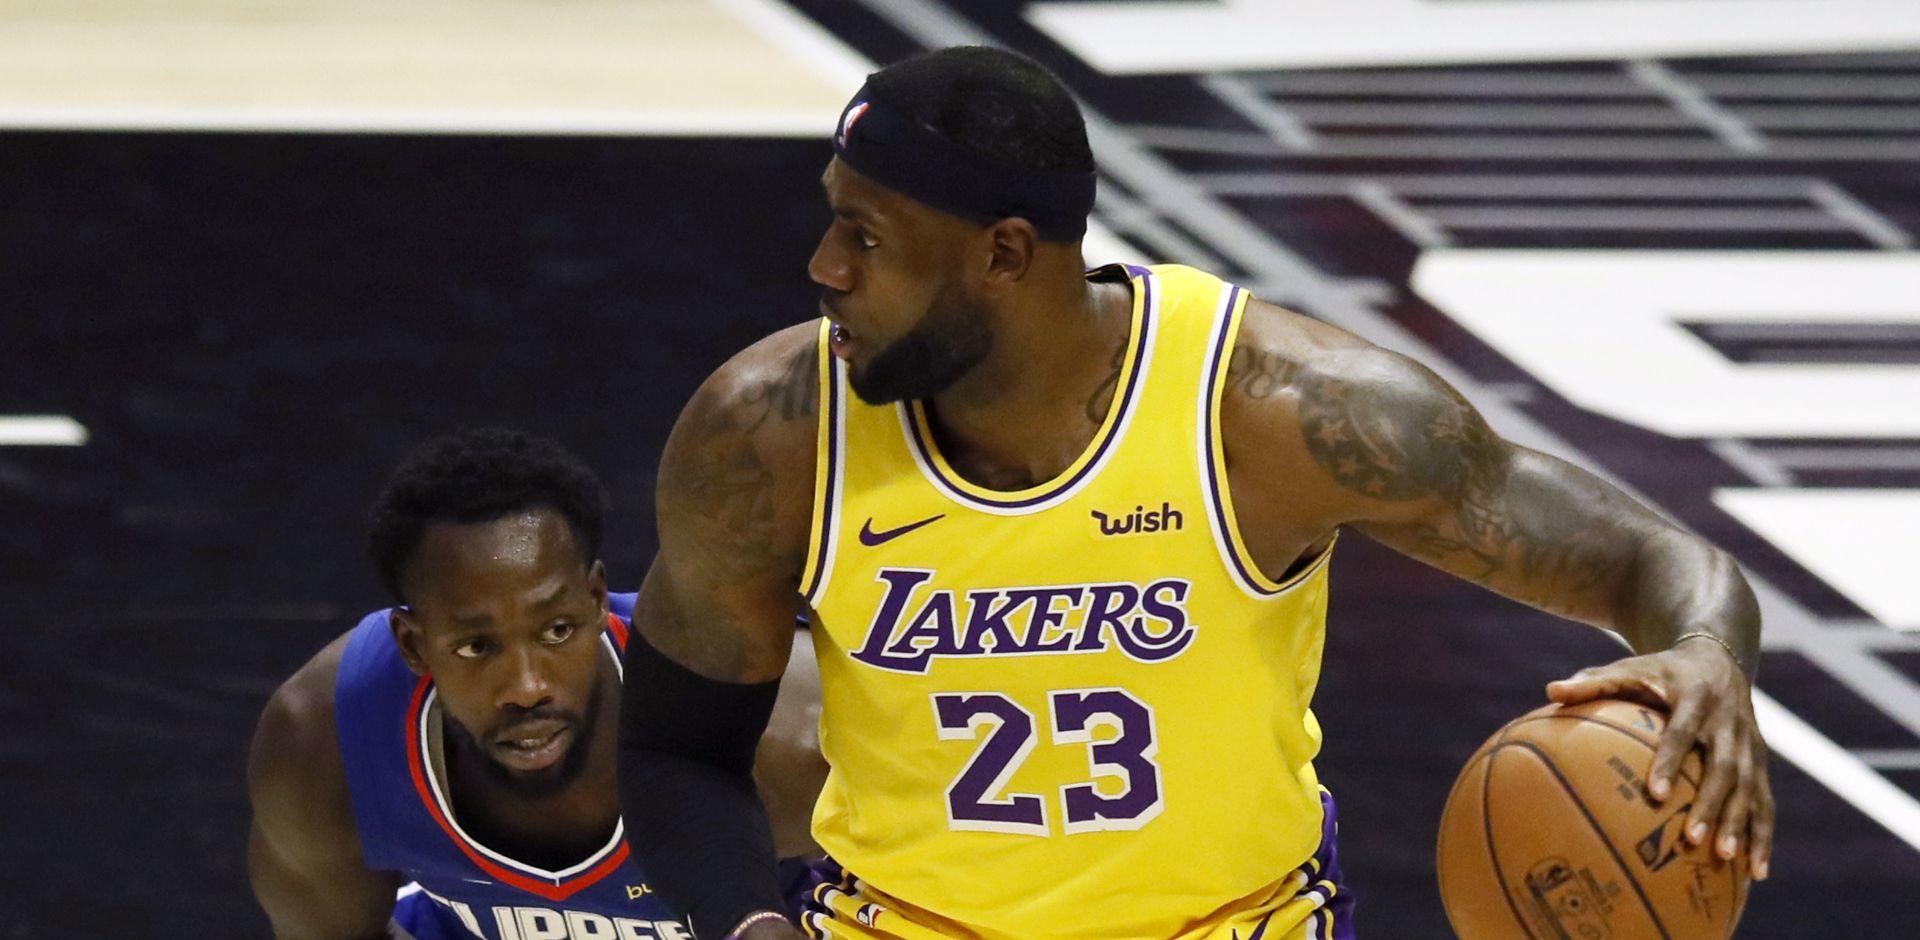 epa07942016 LA Lakers forward LeBron James (R) in action against LA Clippers guard Patrick Beverley during the opening night game between the Los Angeles Lakers and the Los Angeles Clippers at the Staples Center in Los Angeles, California, USA, 22 October 2019.  EPA/ETIENNE LAURENT SHUTTERSTOCK OUT